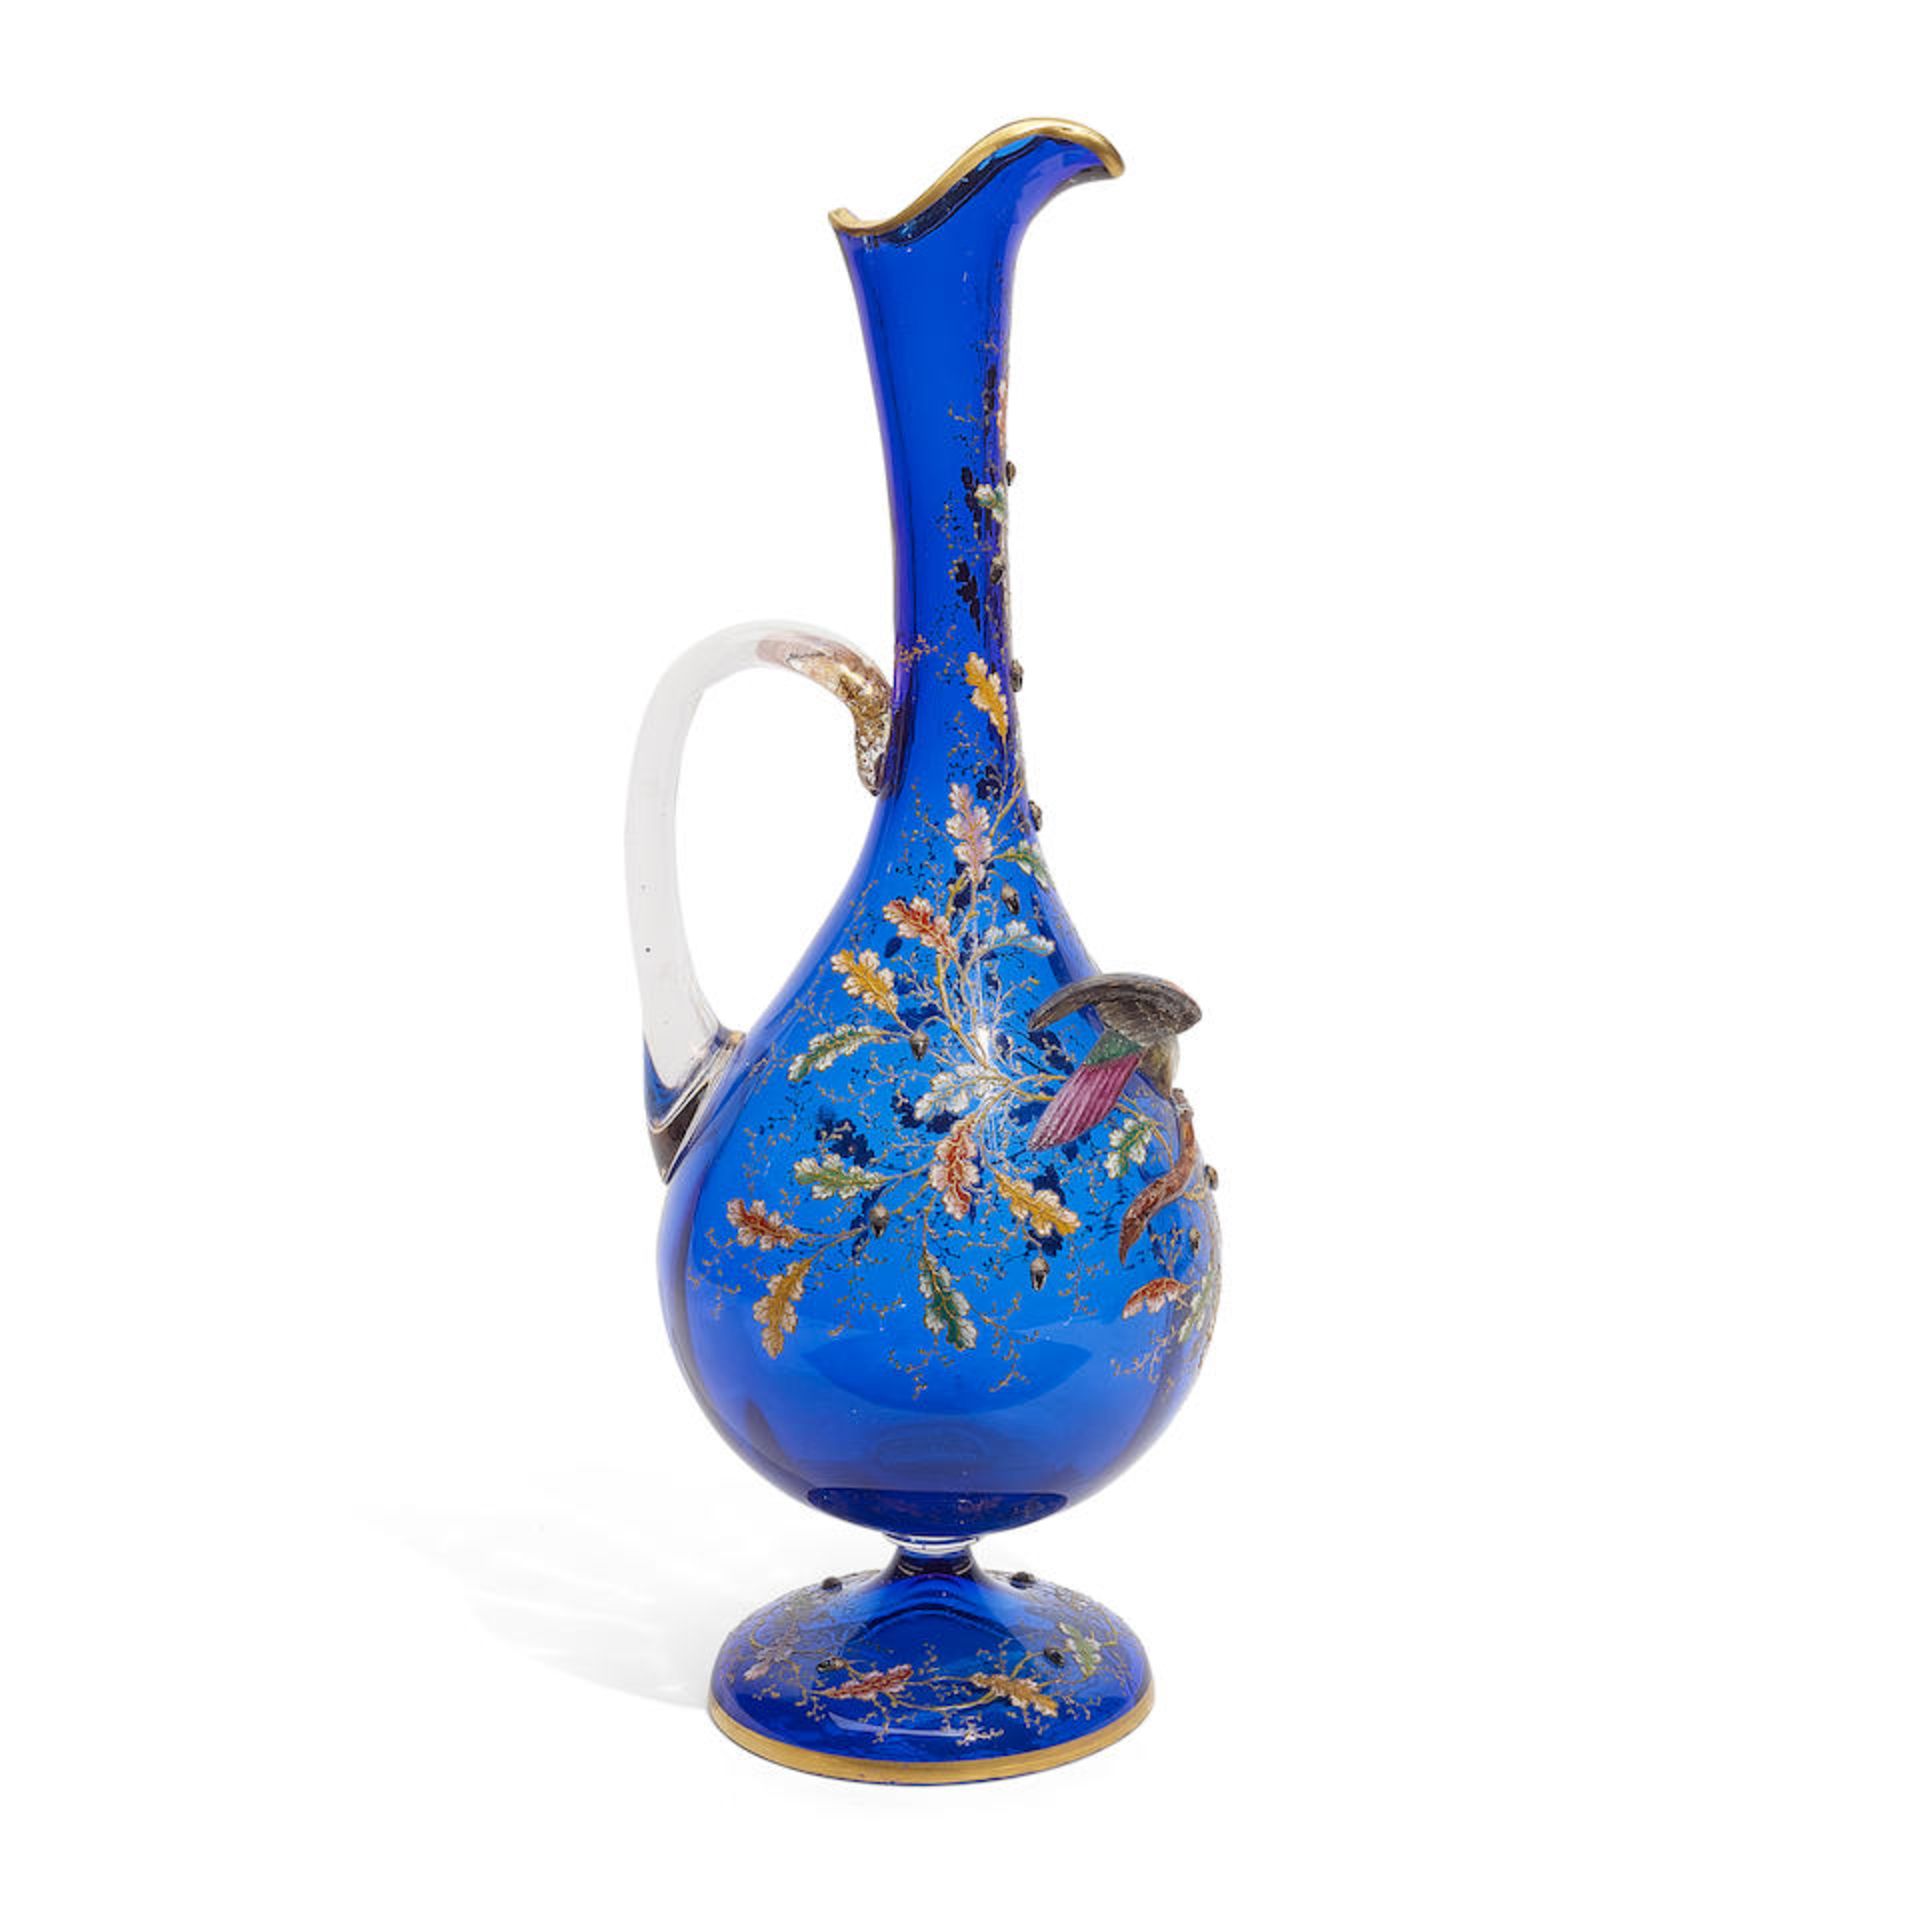 A MOSER GILT AND ENAMELLED BLUE GLASS EWERLate 19th century